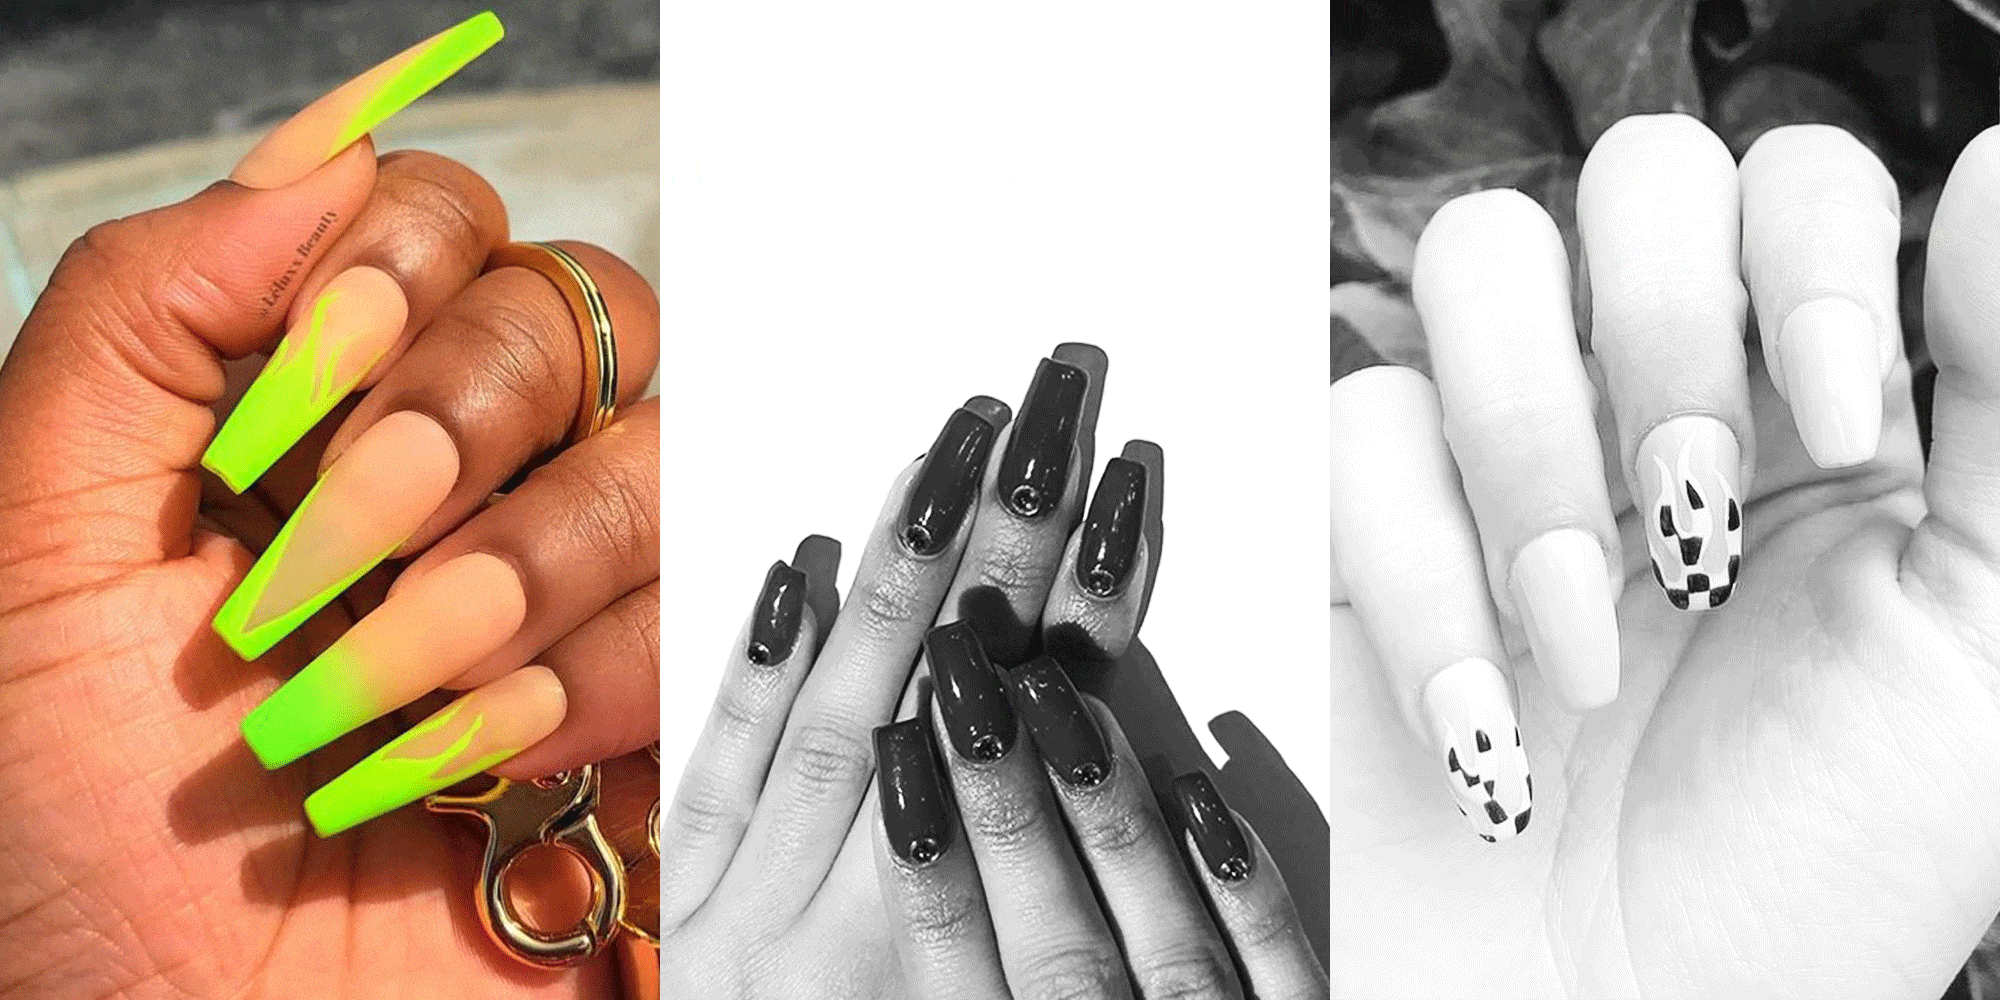 13 Coffin Nail Art Ideas To Copy Best Designs For Short Or